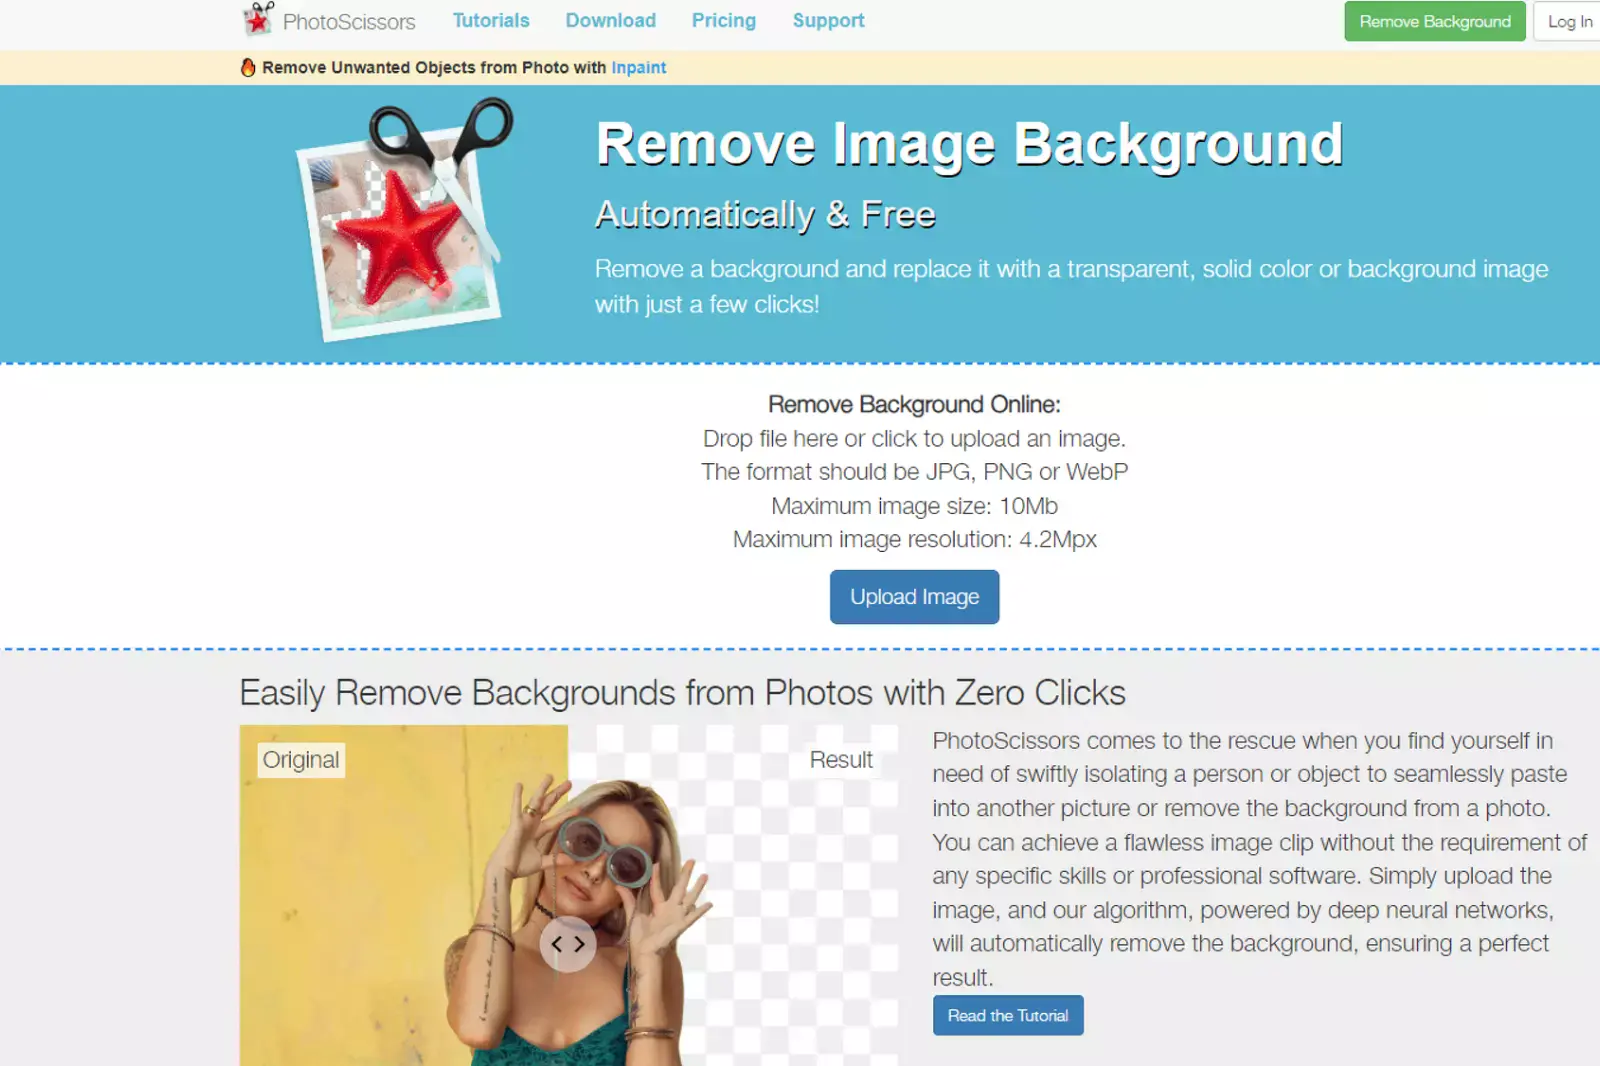 Home Page of PhotoScissors